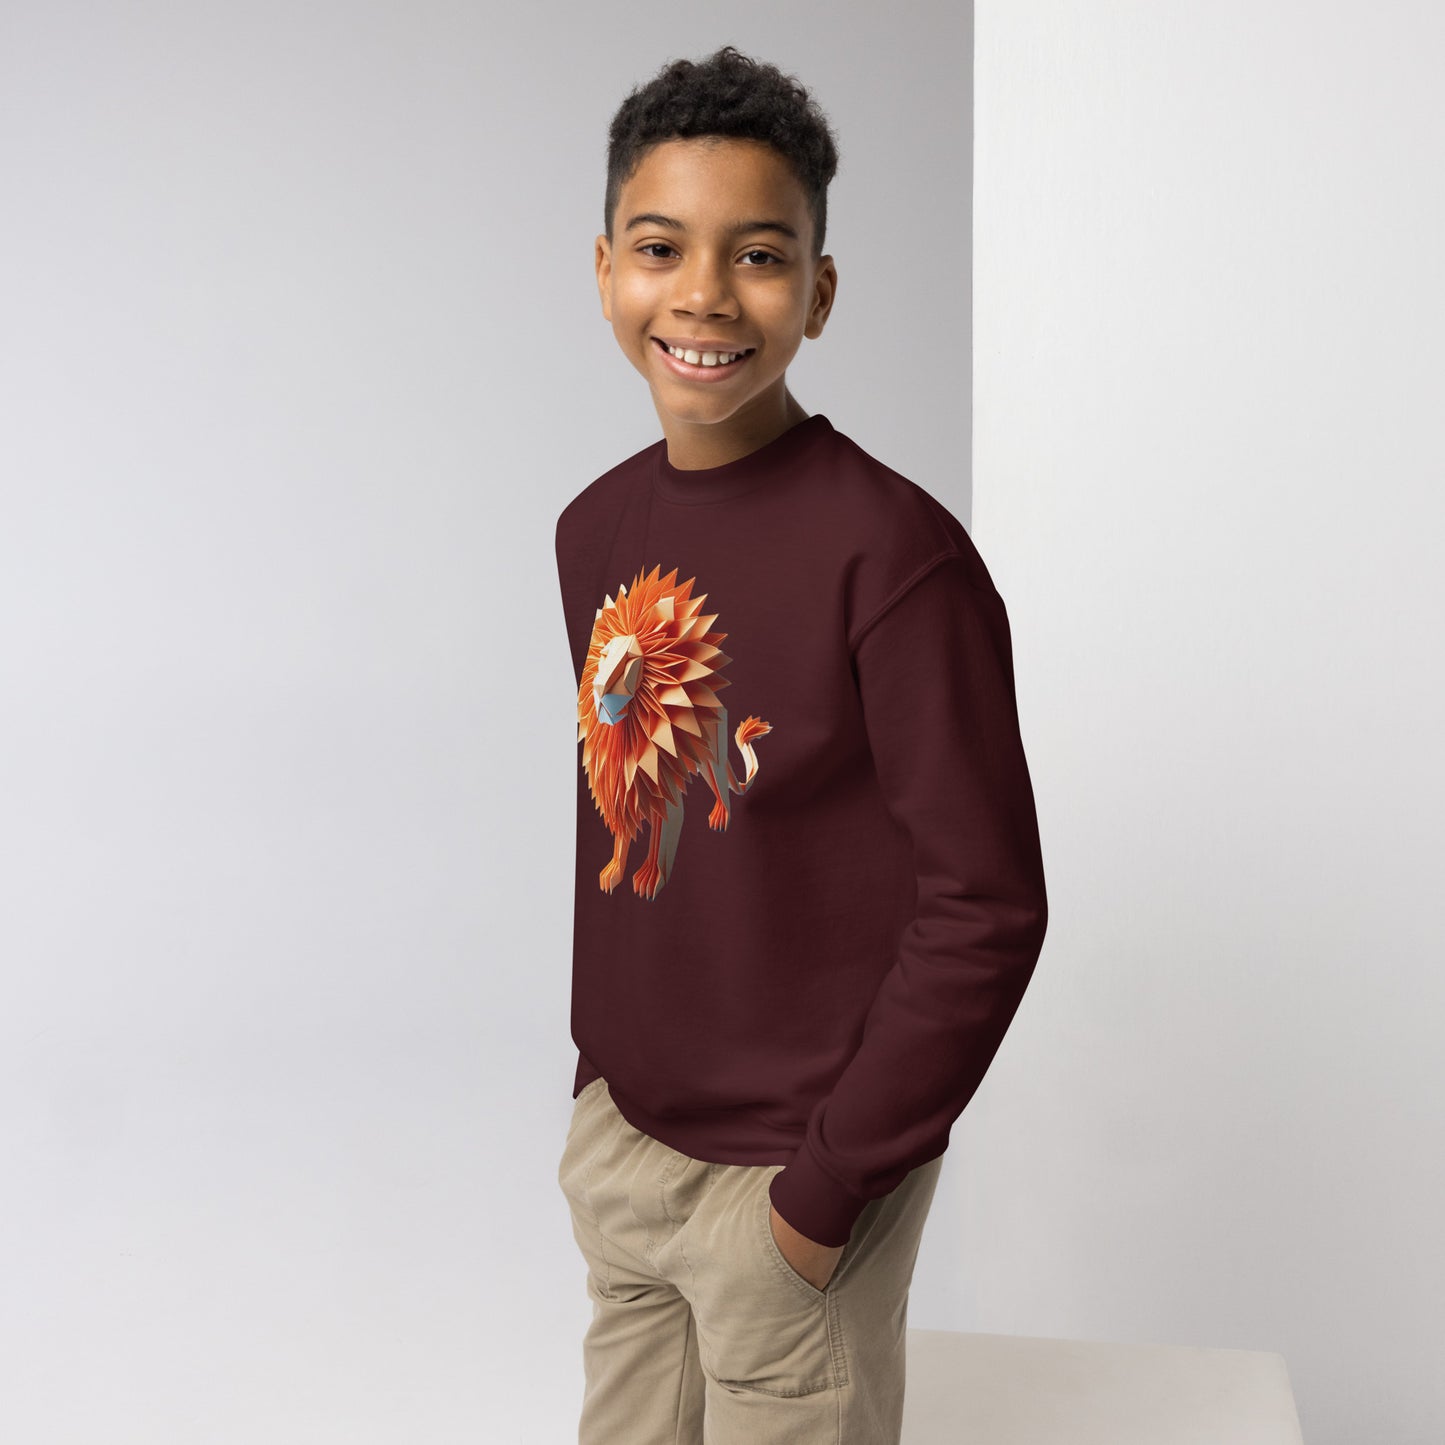 Youth with maroon Sweater with print of a lion